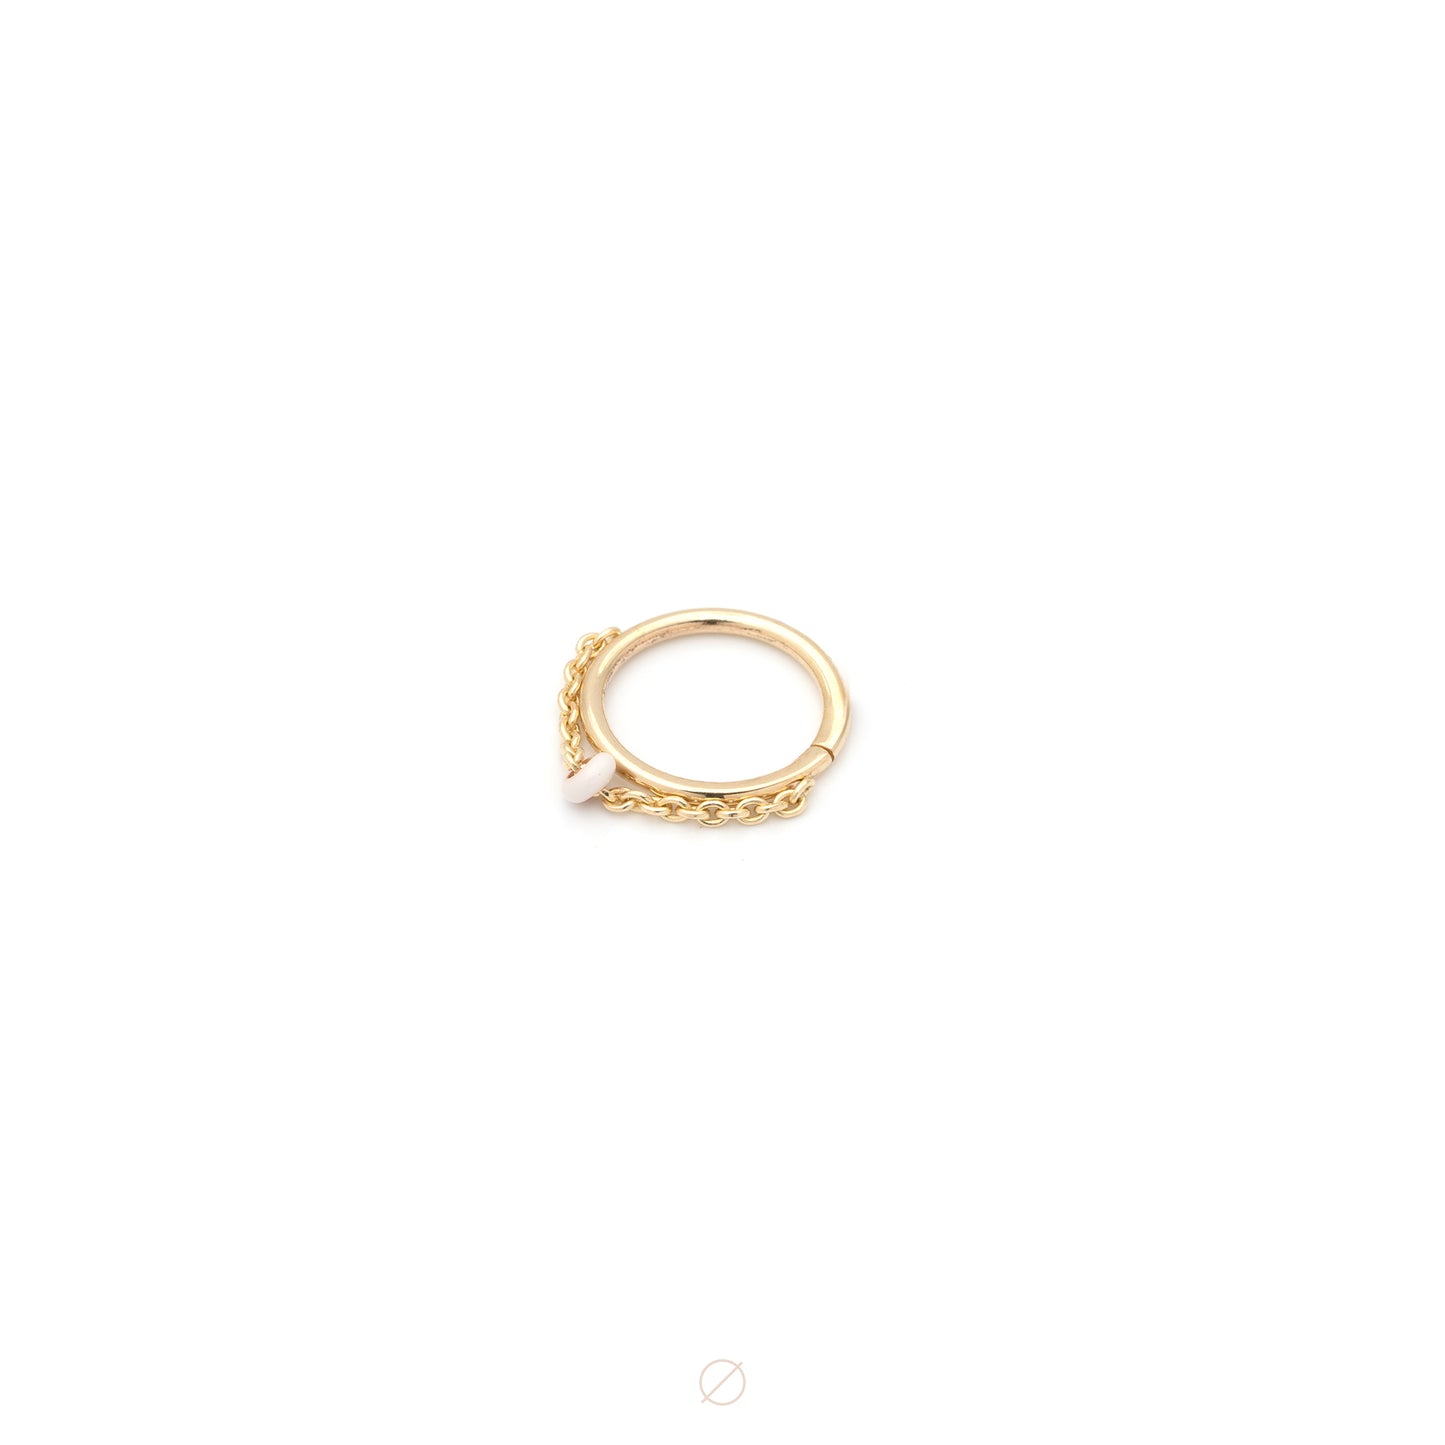 Vibrant Seam Ring in Yellow Gold by Pupil Hall